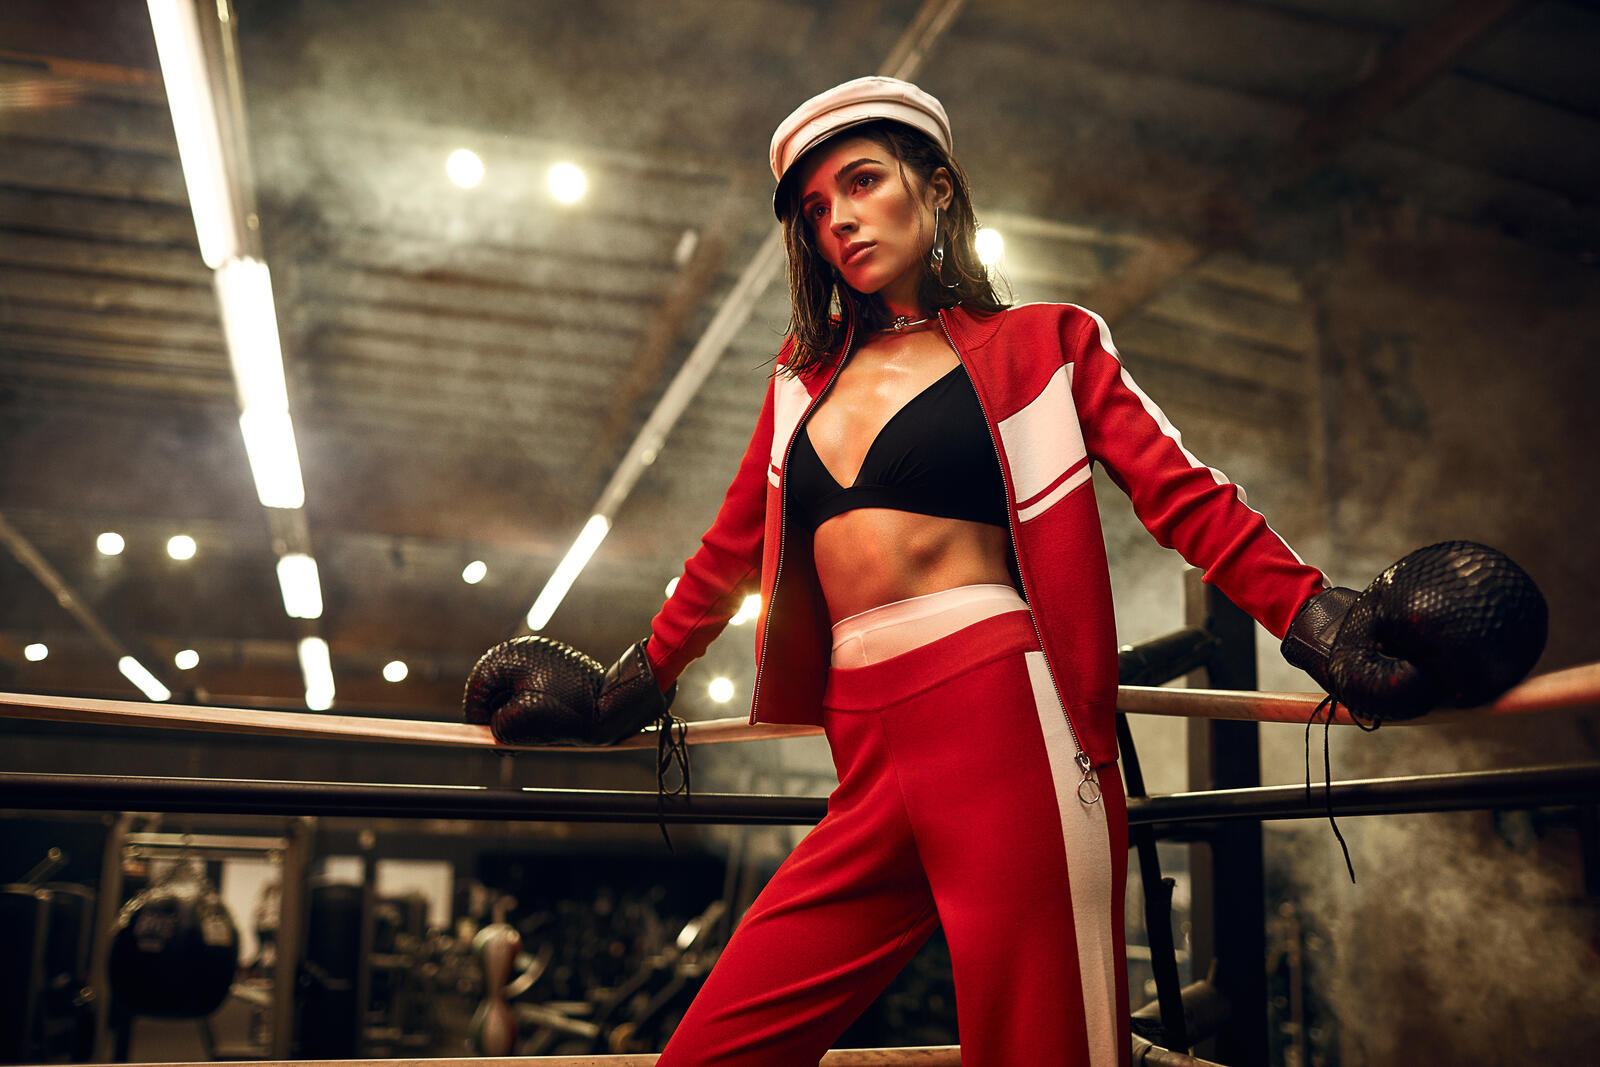 Wallpapers Olivia Culpo girls boxing on the desktop